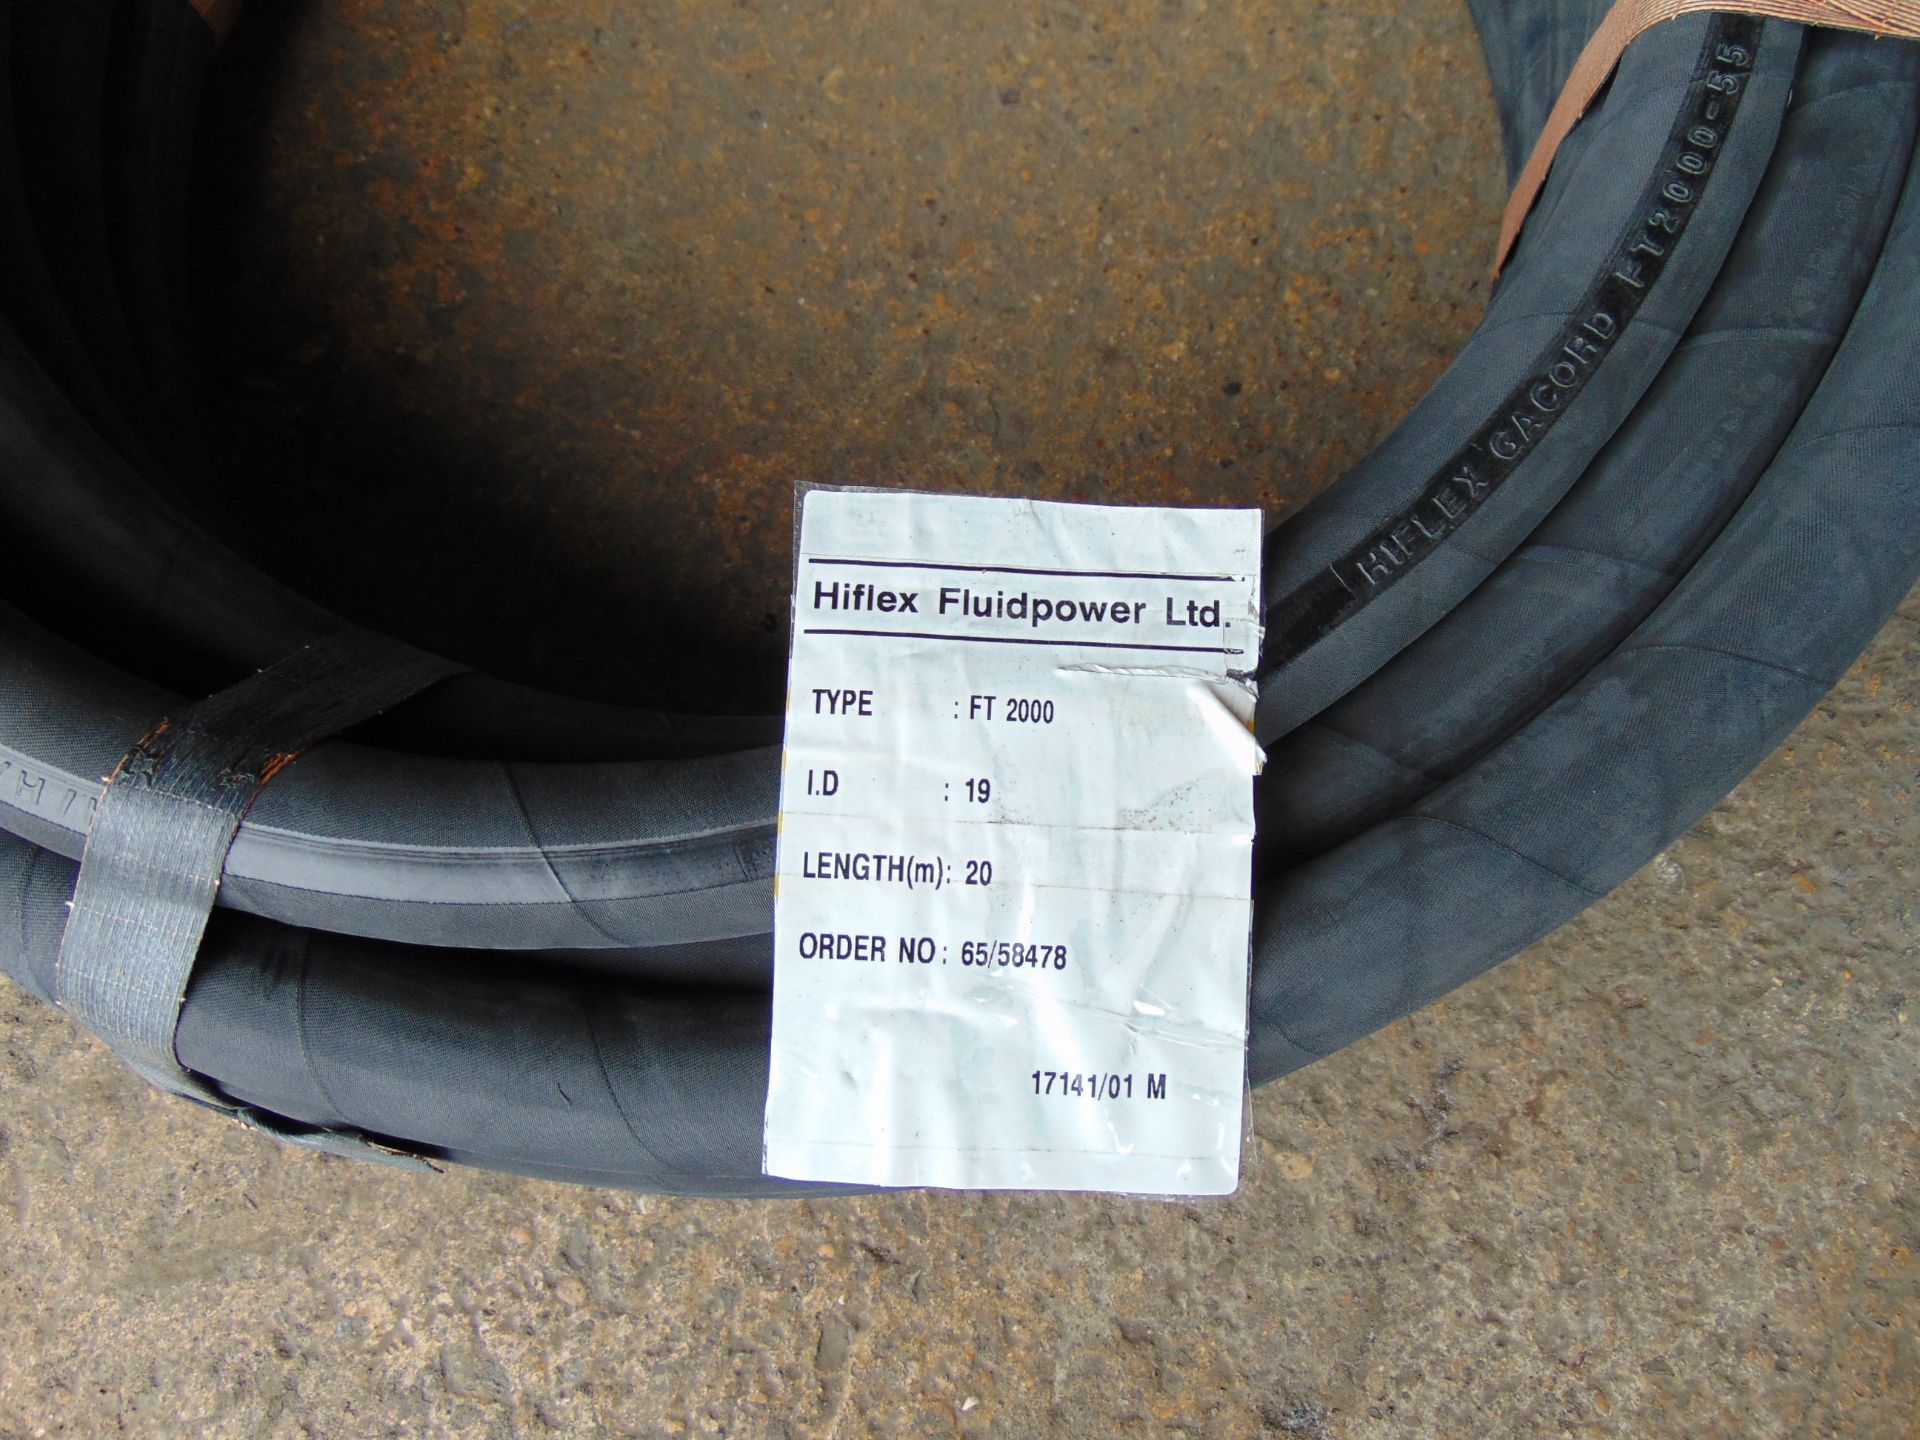 New 20m Roll of 19mm Low Pressure Double Braid Hose - Image 2 of 5